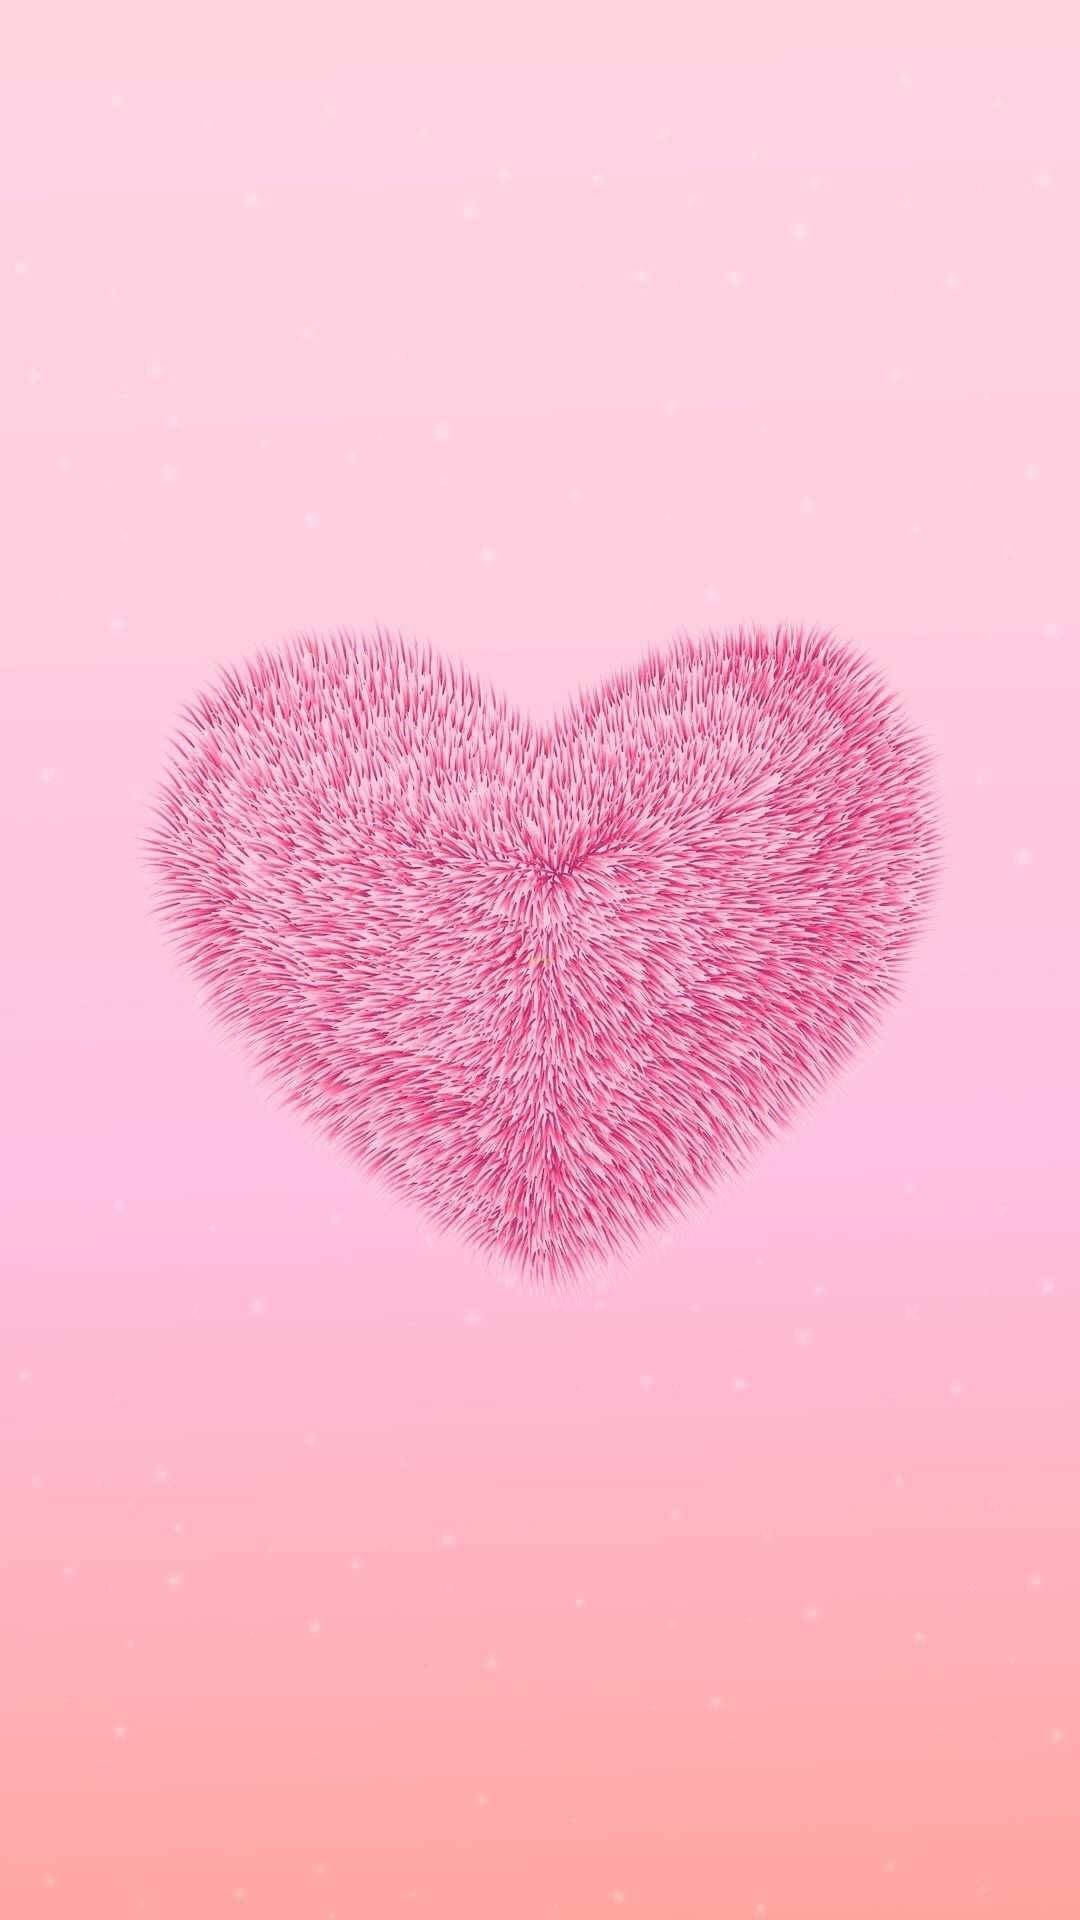 Aesthetic Pink Iphone Fluffy Heart